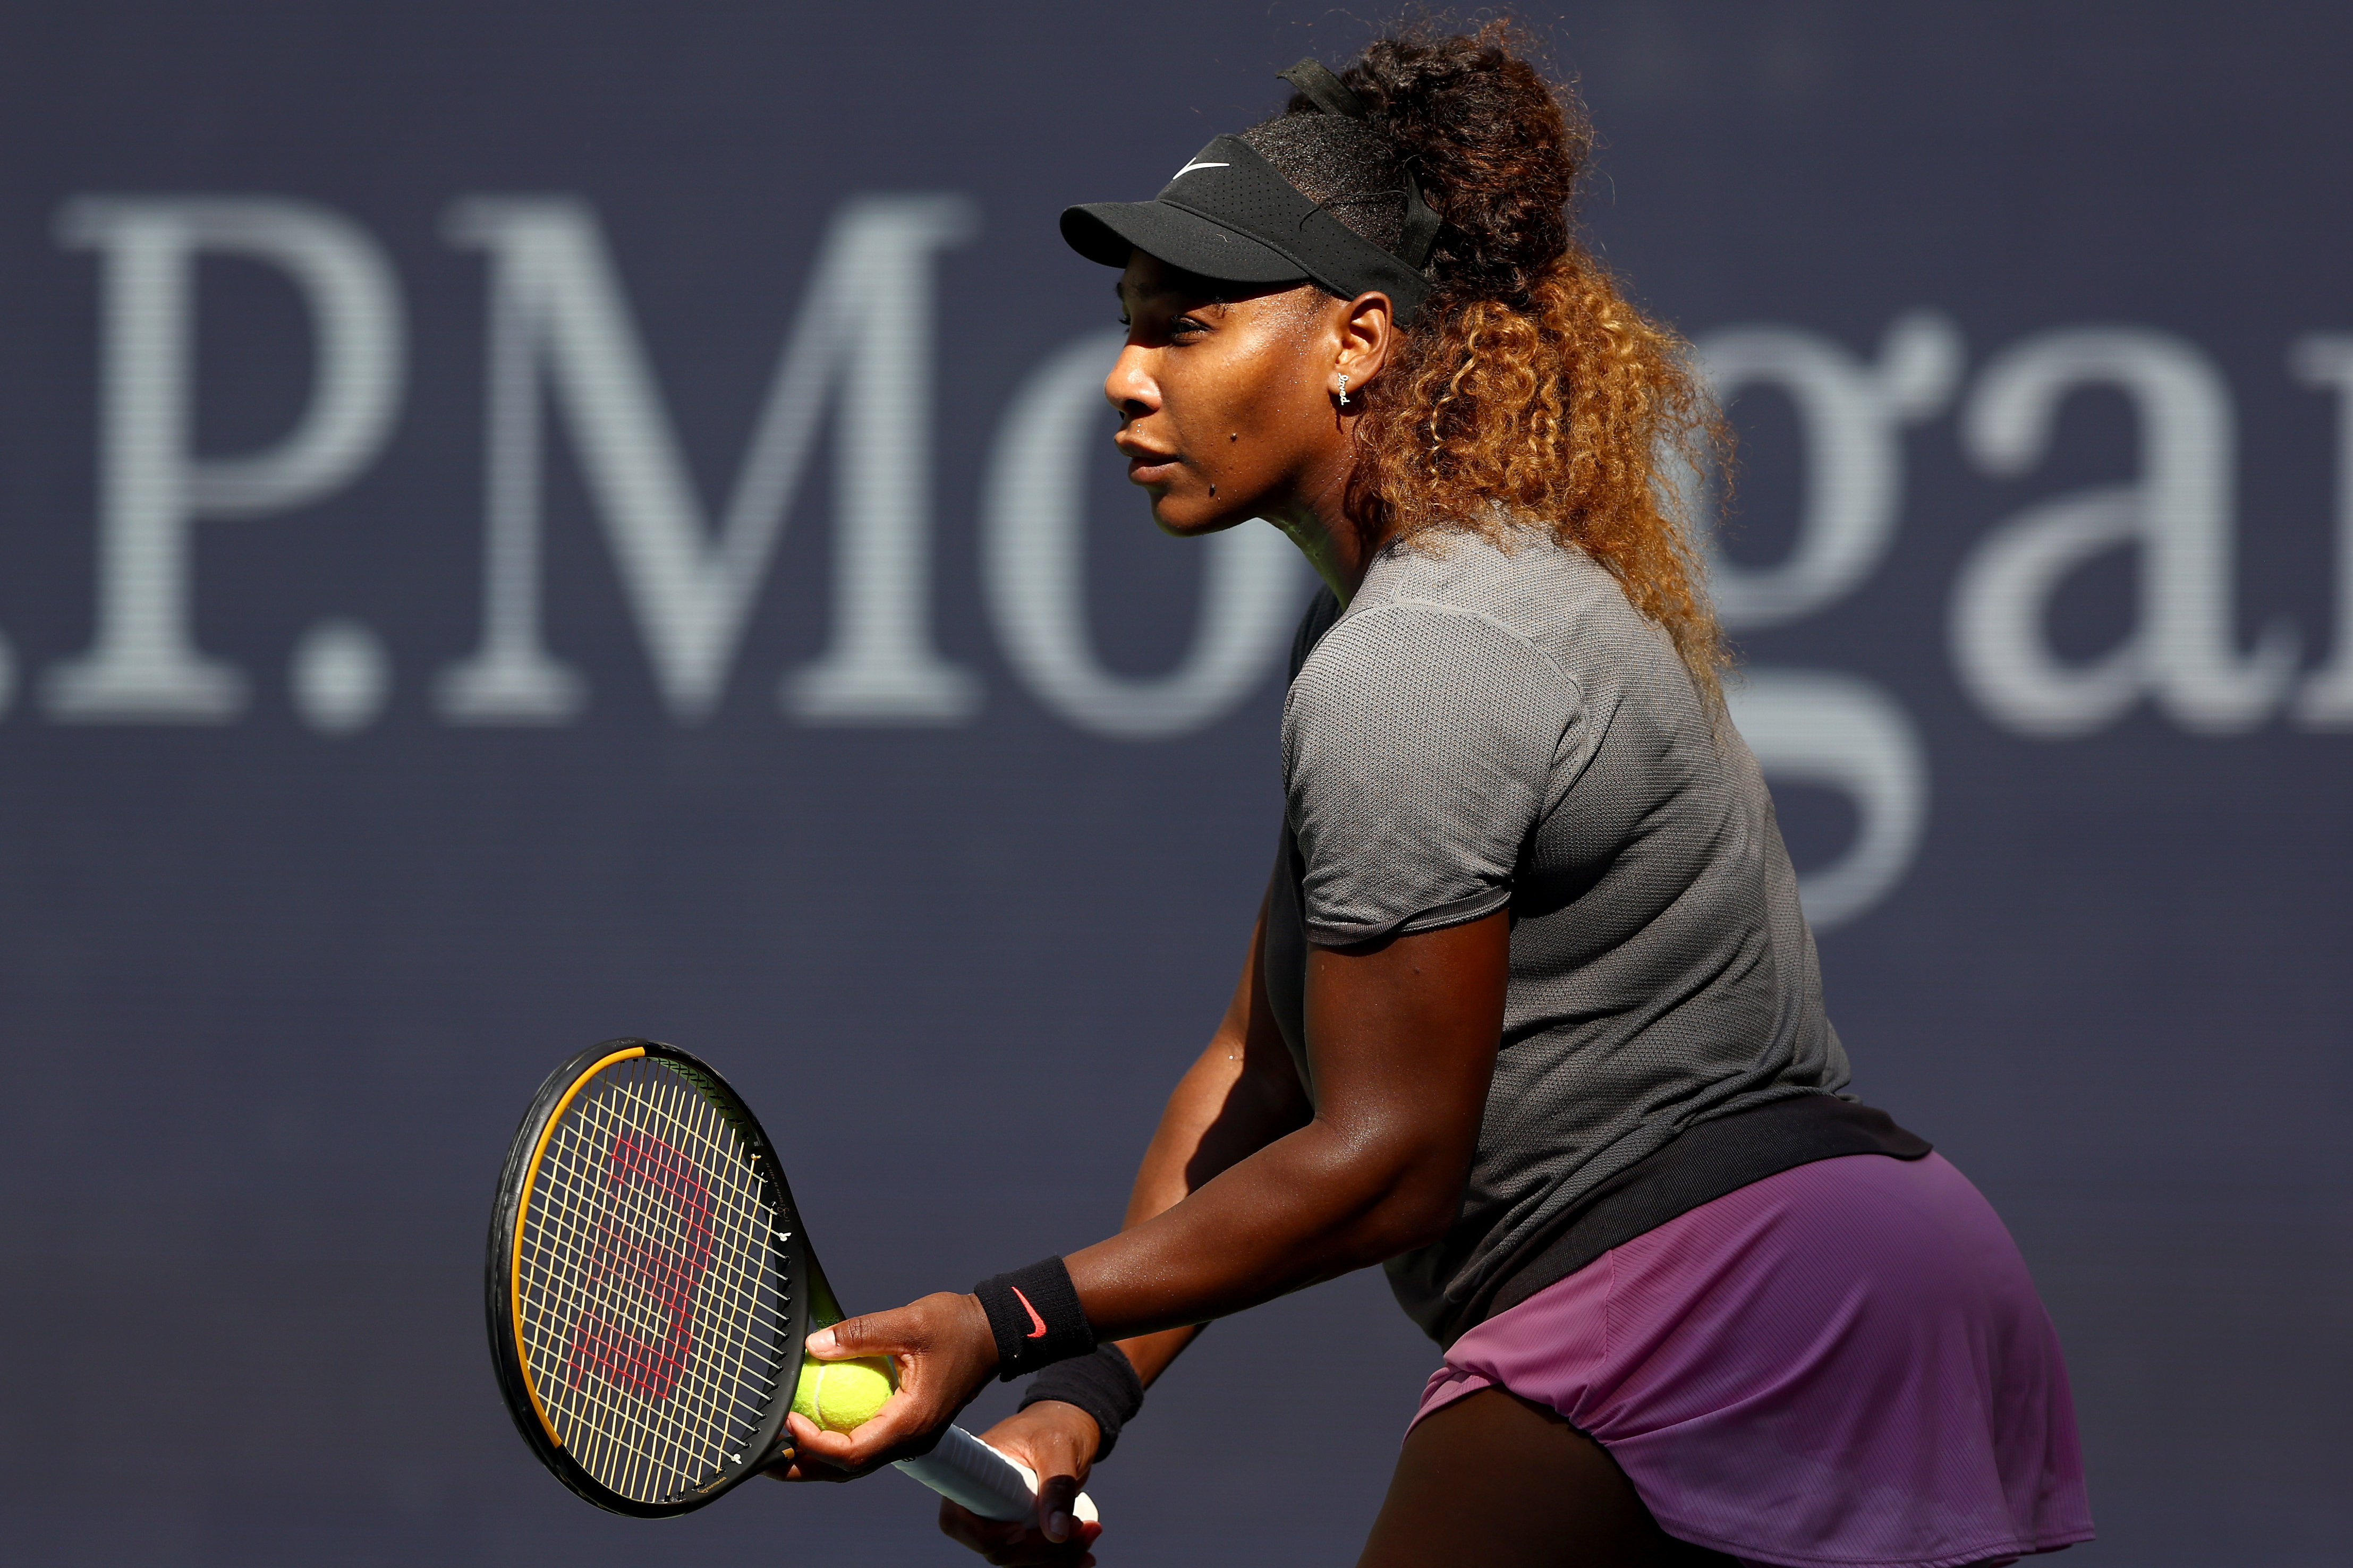 Serena Williams takes the court for the first match of her last U.S